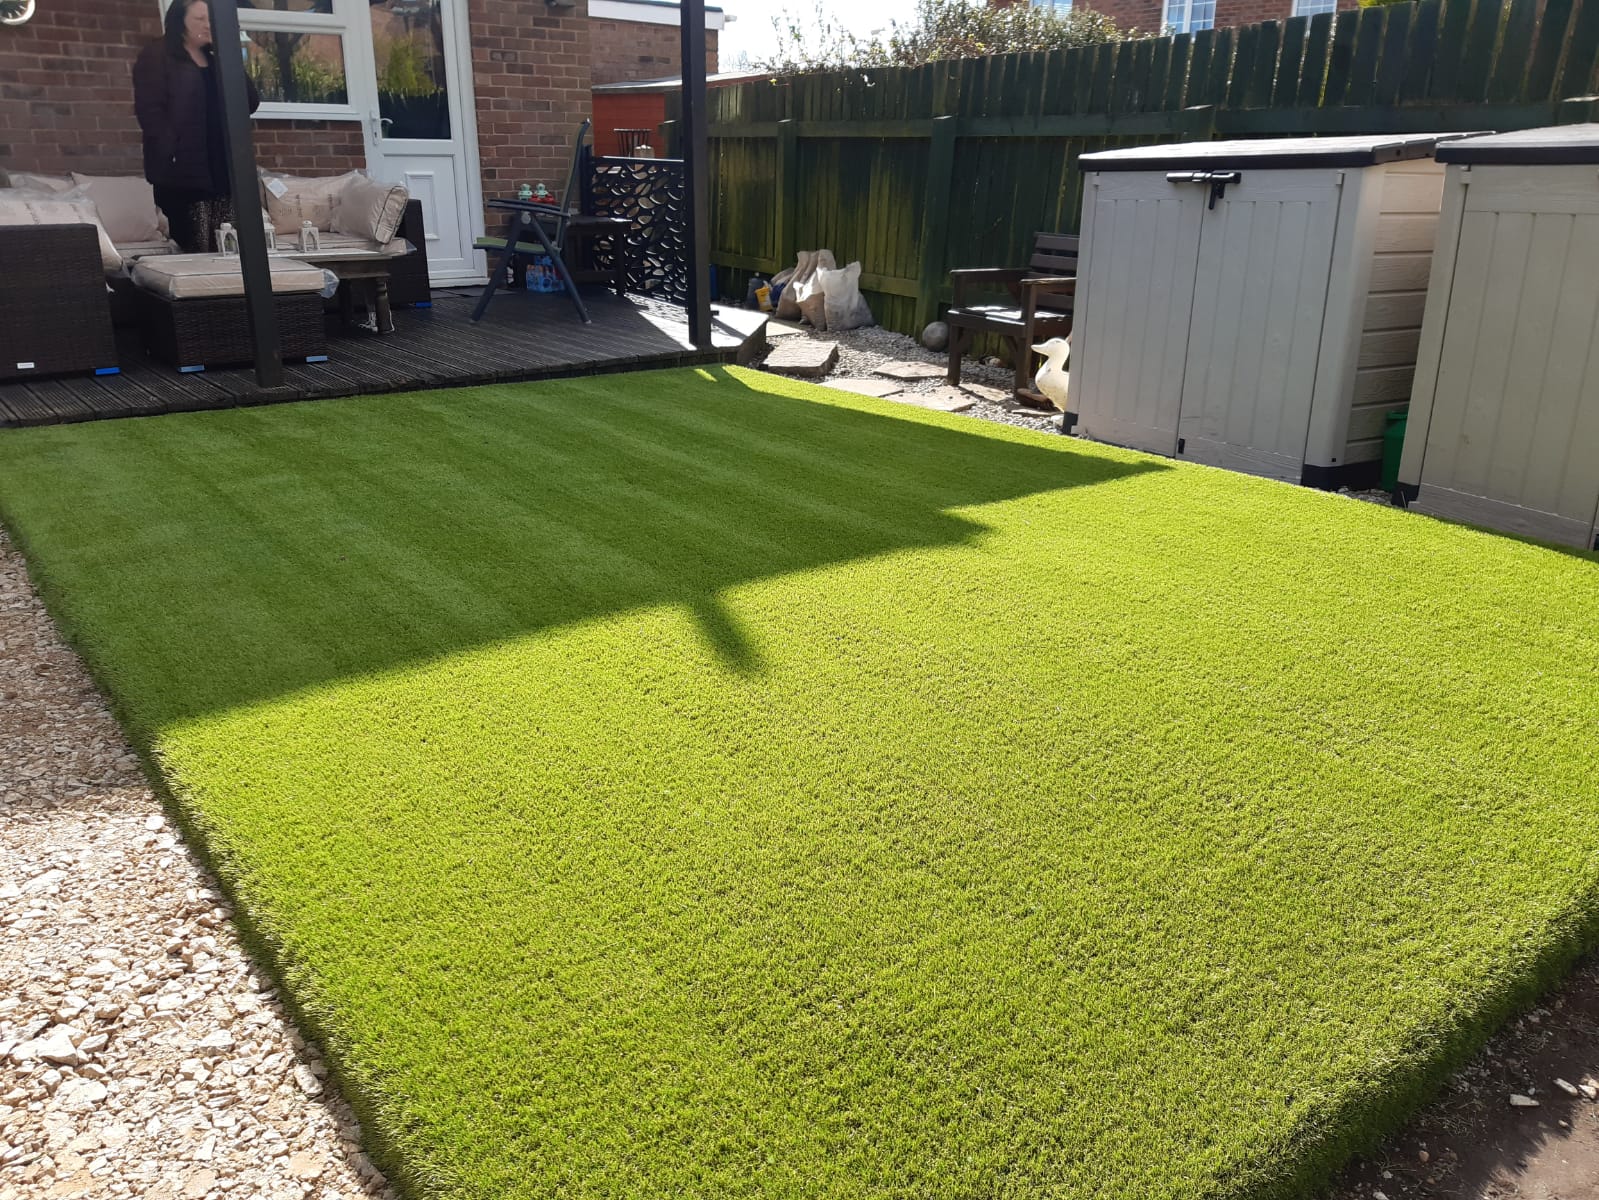 Completed small area install of artificial grass.